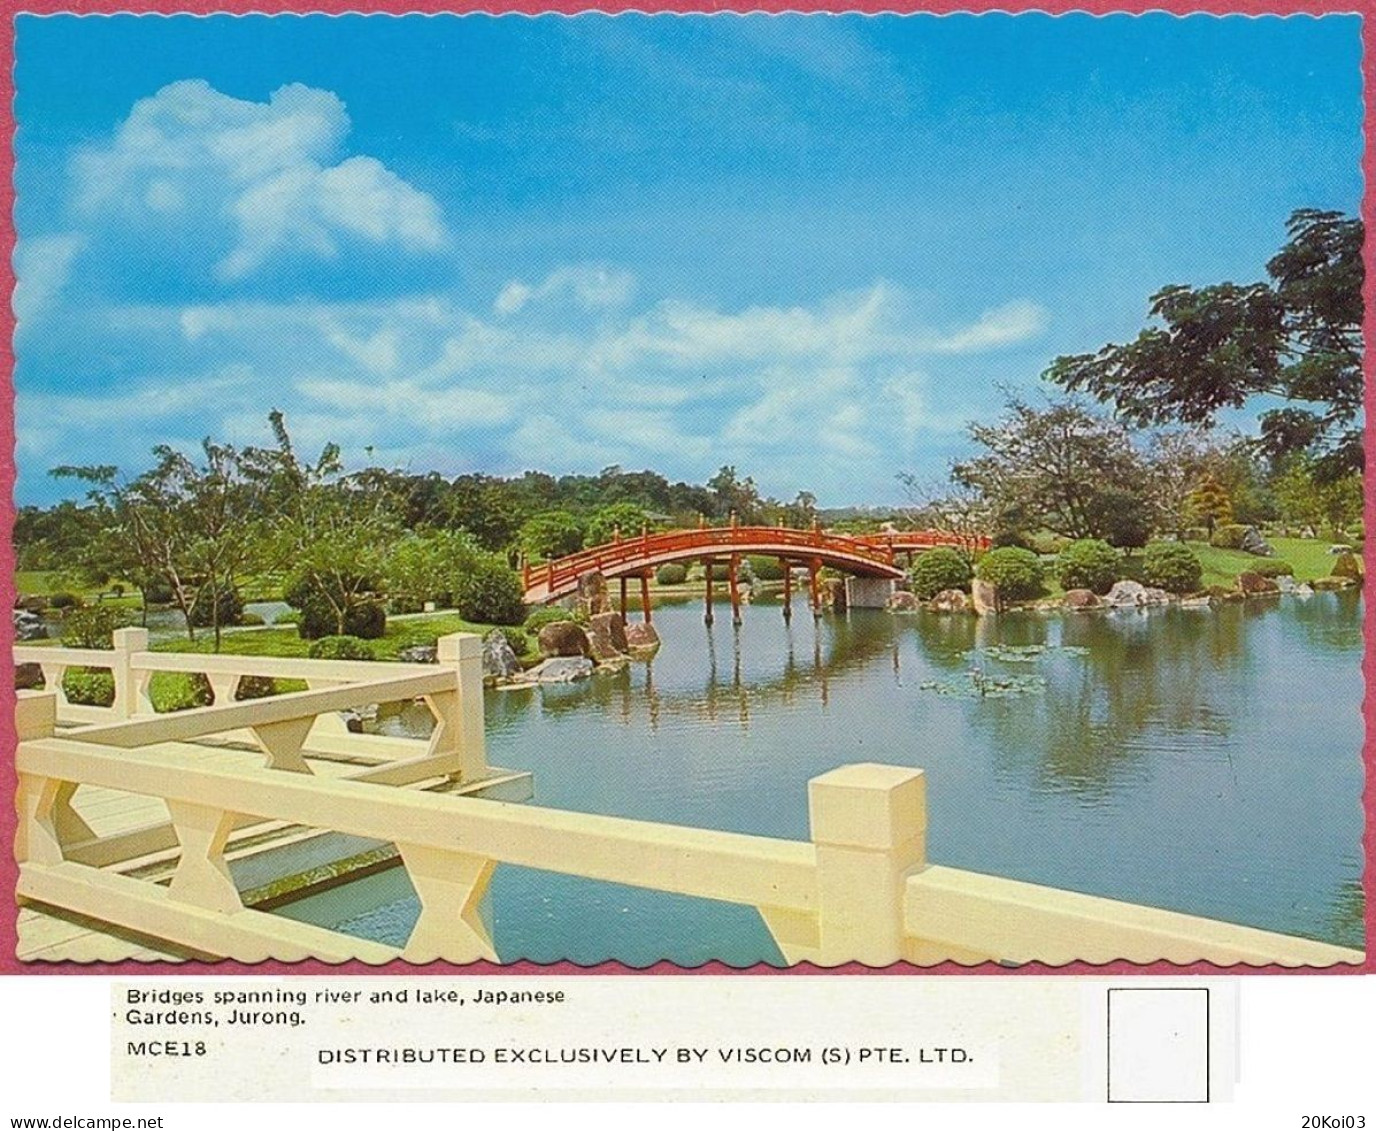 Singapore Japanese Gardens, Jurong +/-1978's MCE18 DISTRIBUTED EXCLUSIVELY BY VISCOM (S) PTE. LTD. Vintage UNC_cpc - Singapore